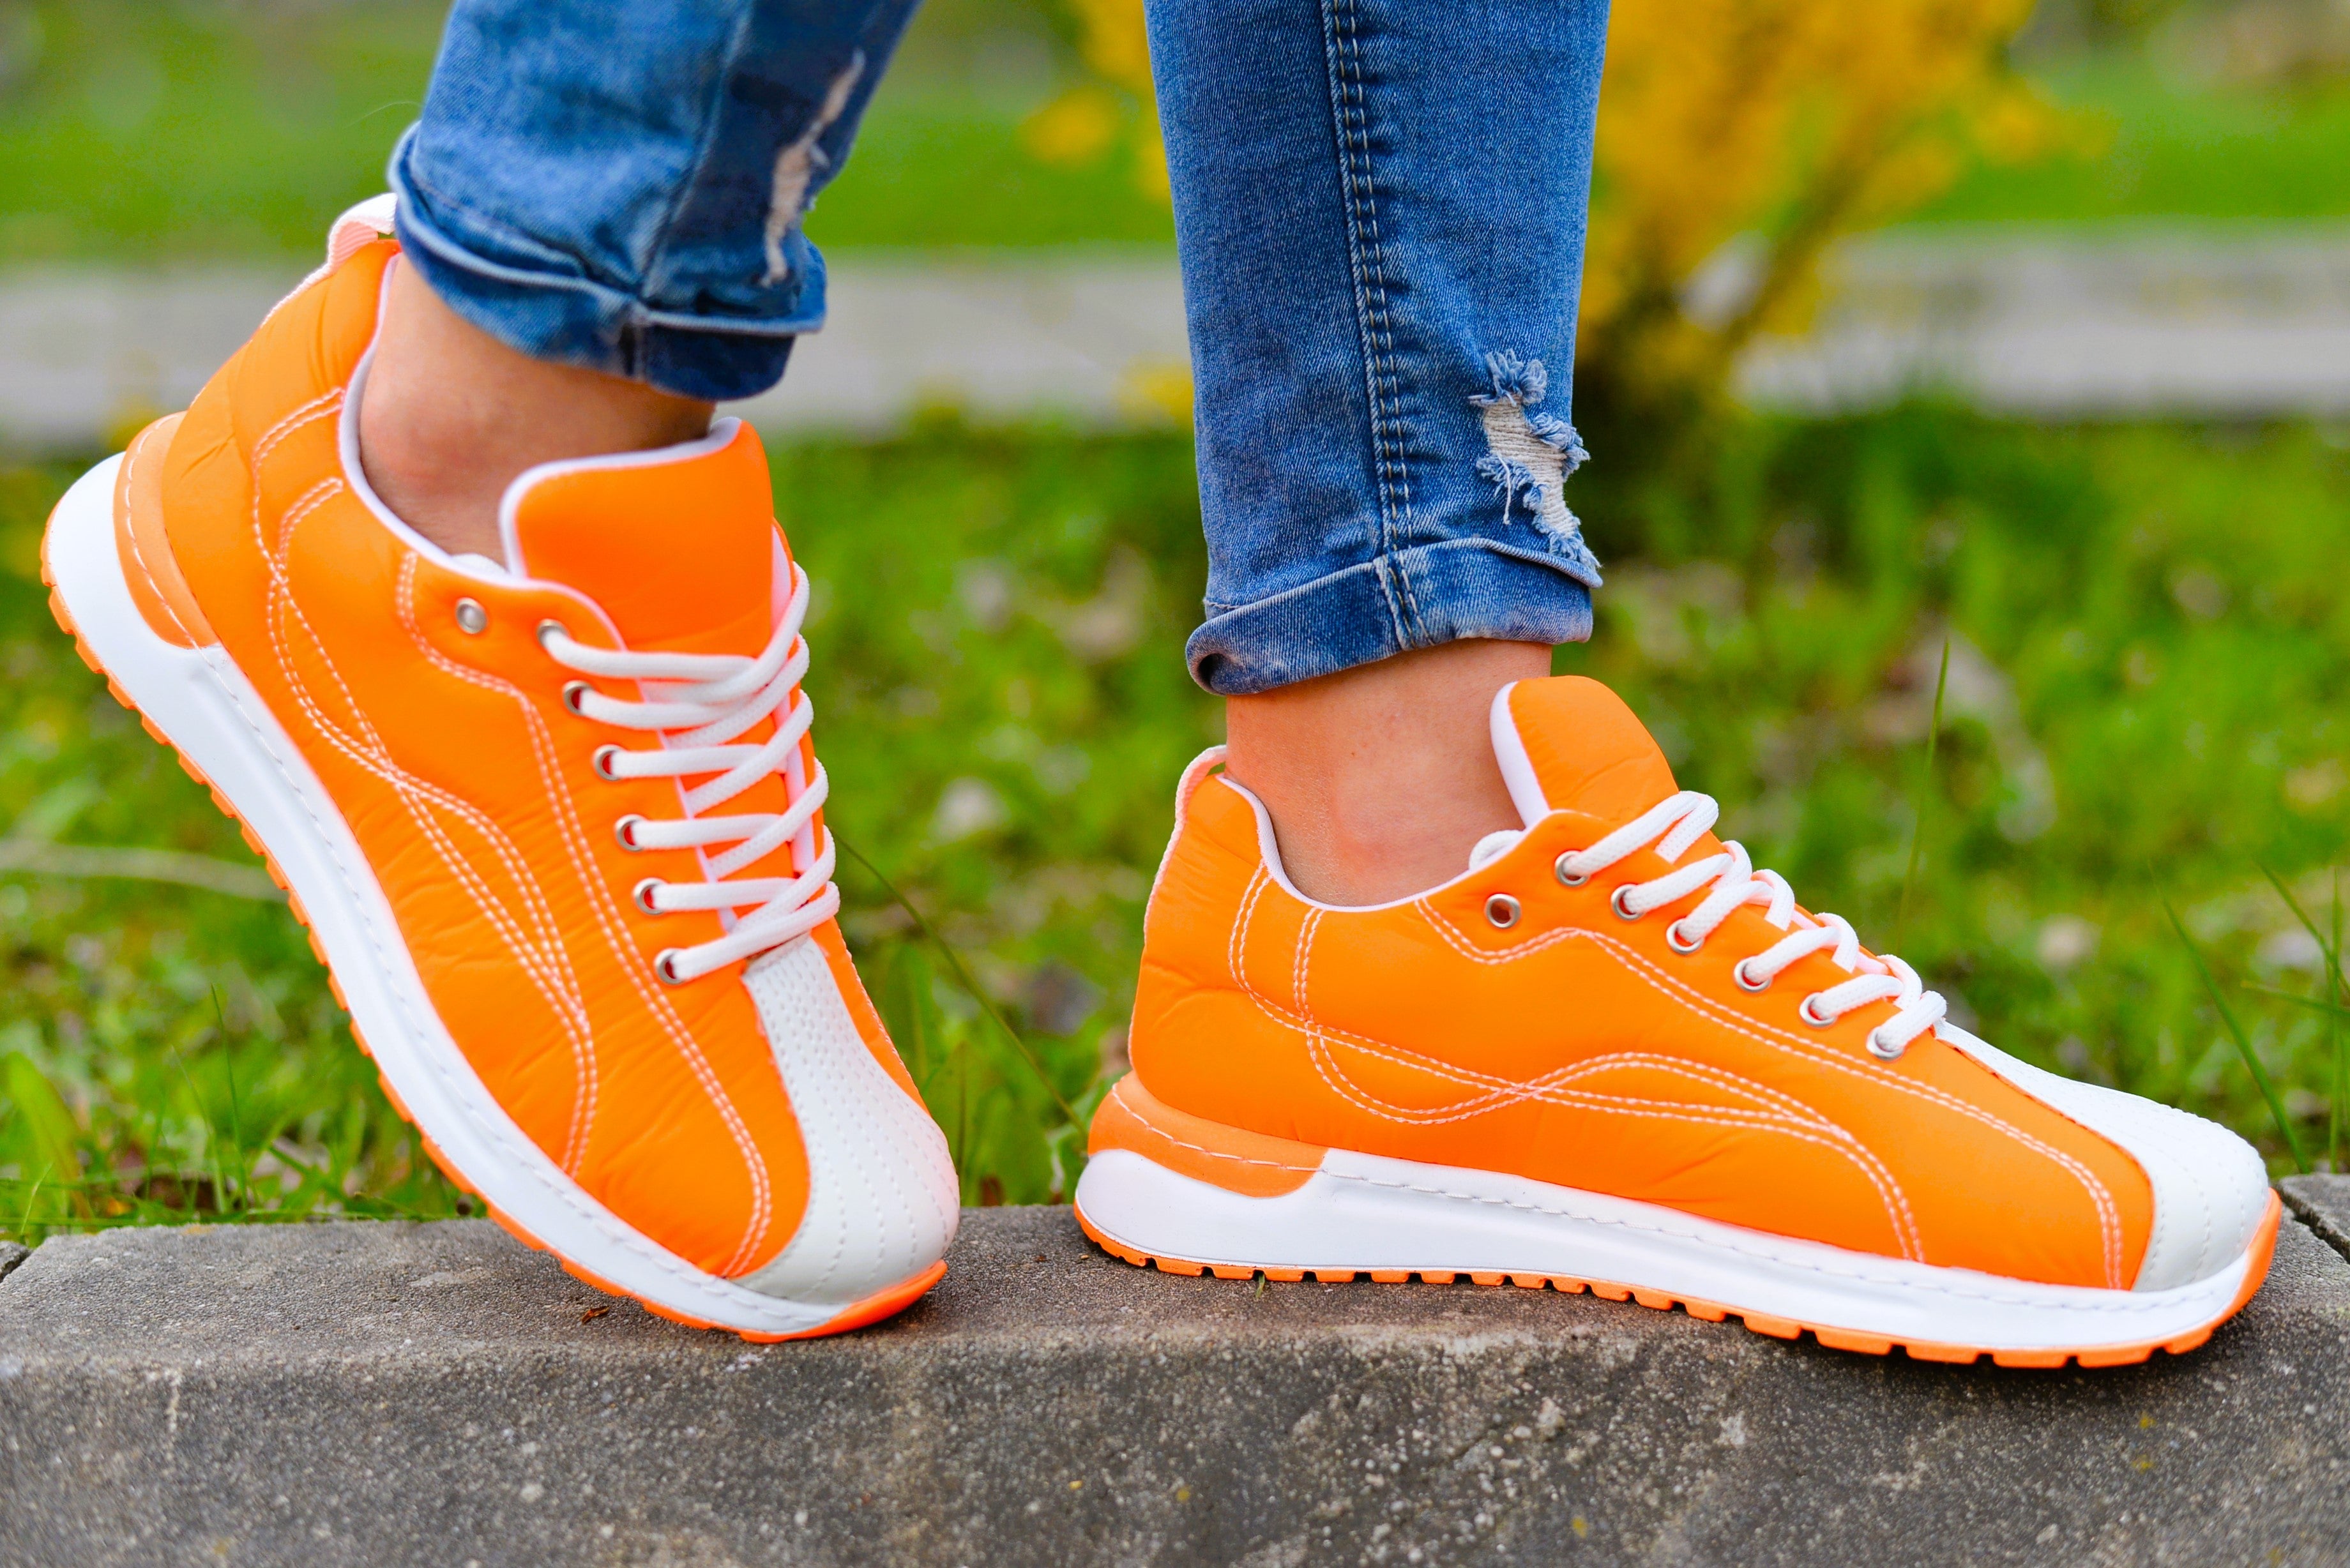 Women's Orange Neon Kate Sneakers Shoes Made of Textile Material